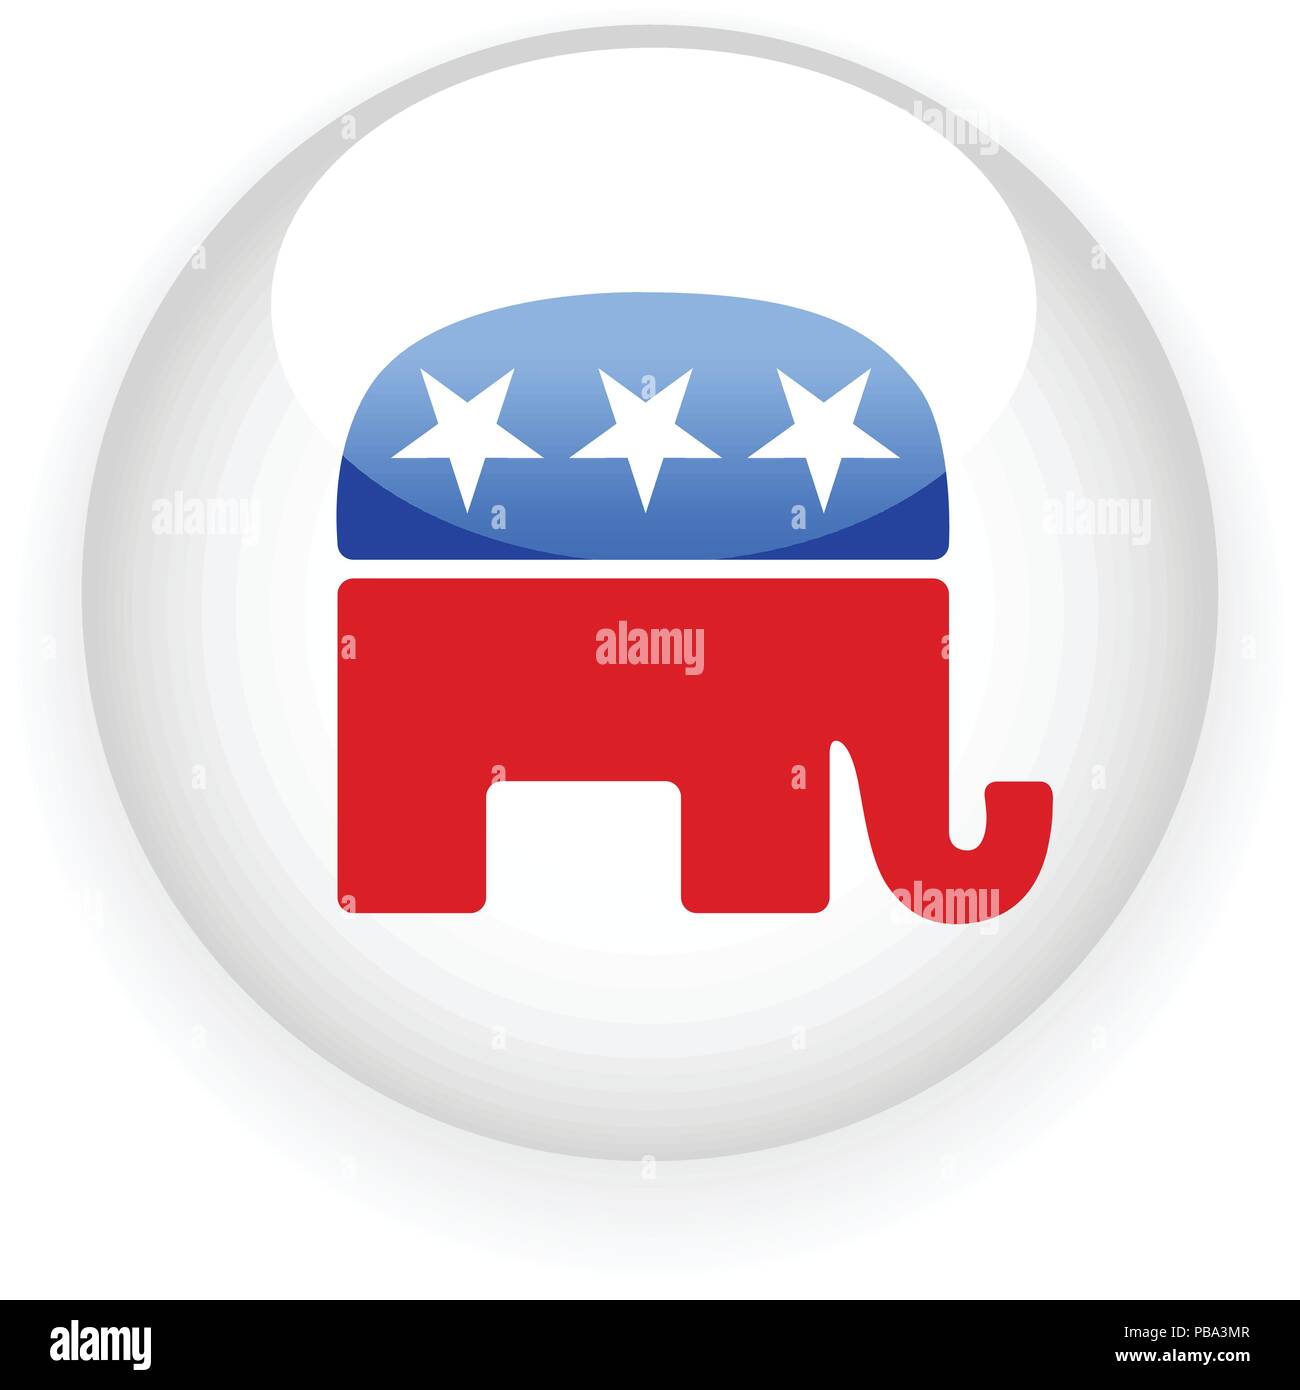 Round badge with republican elephant symbol Stock Vector